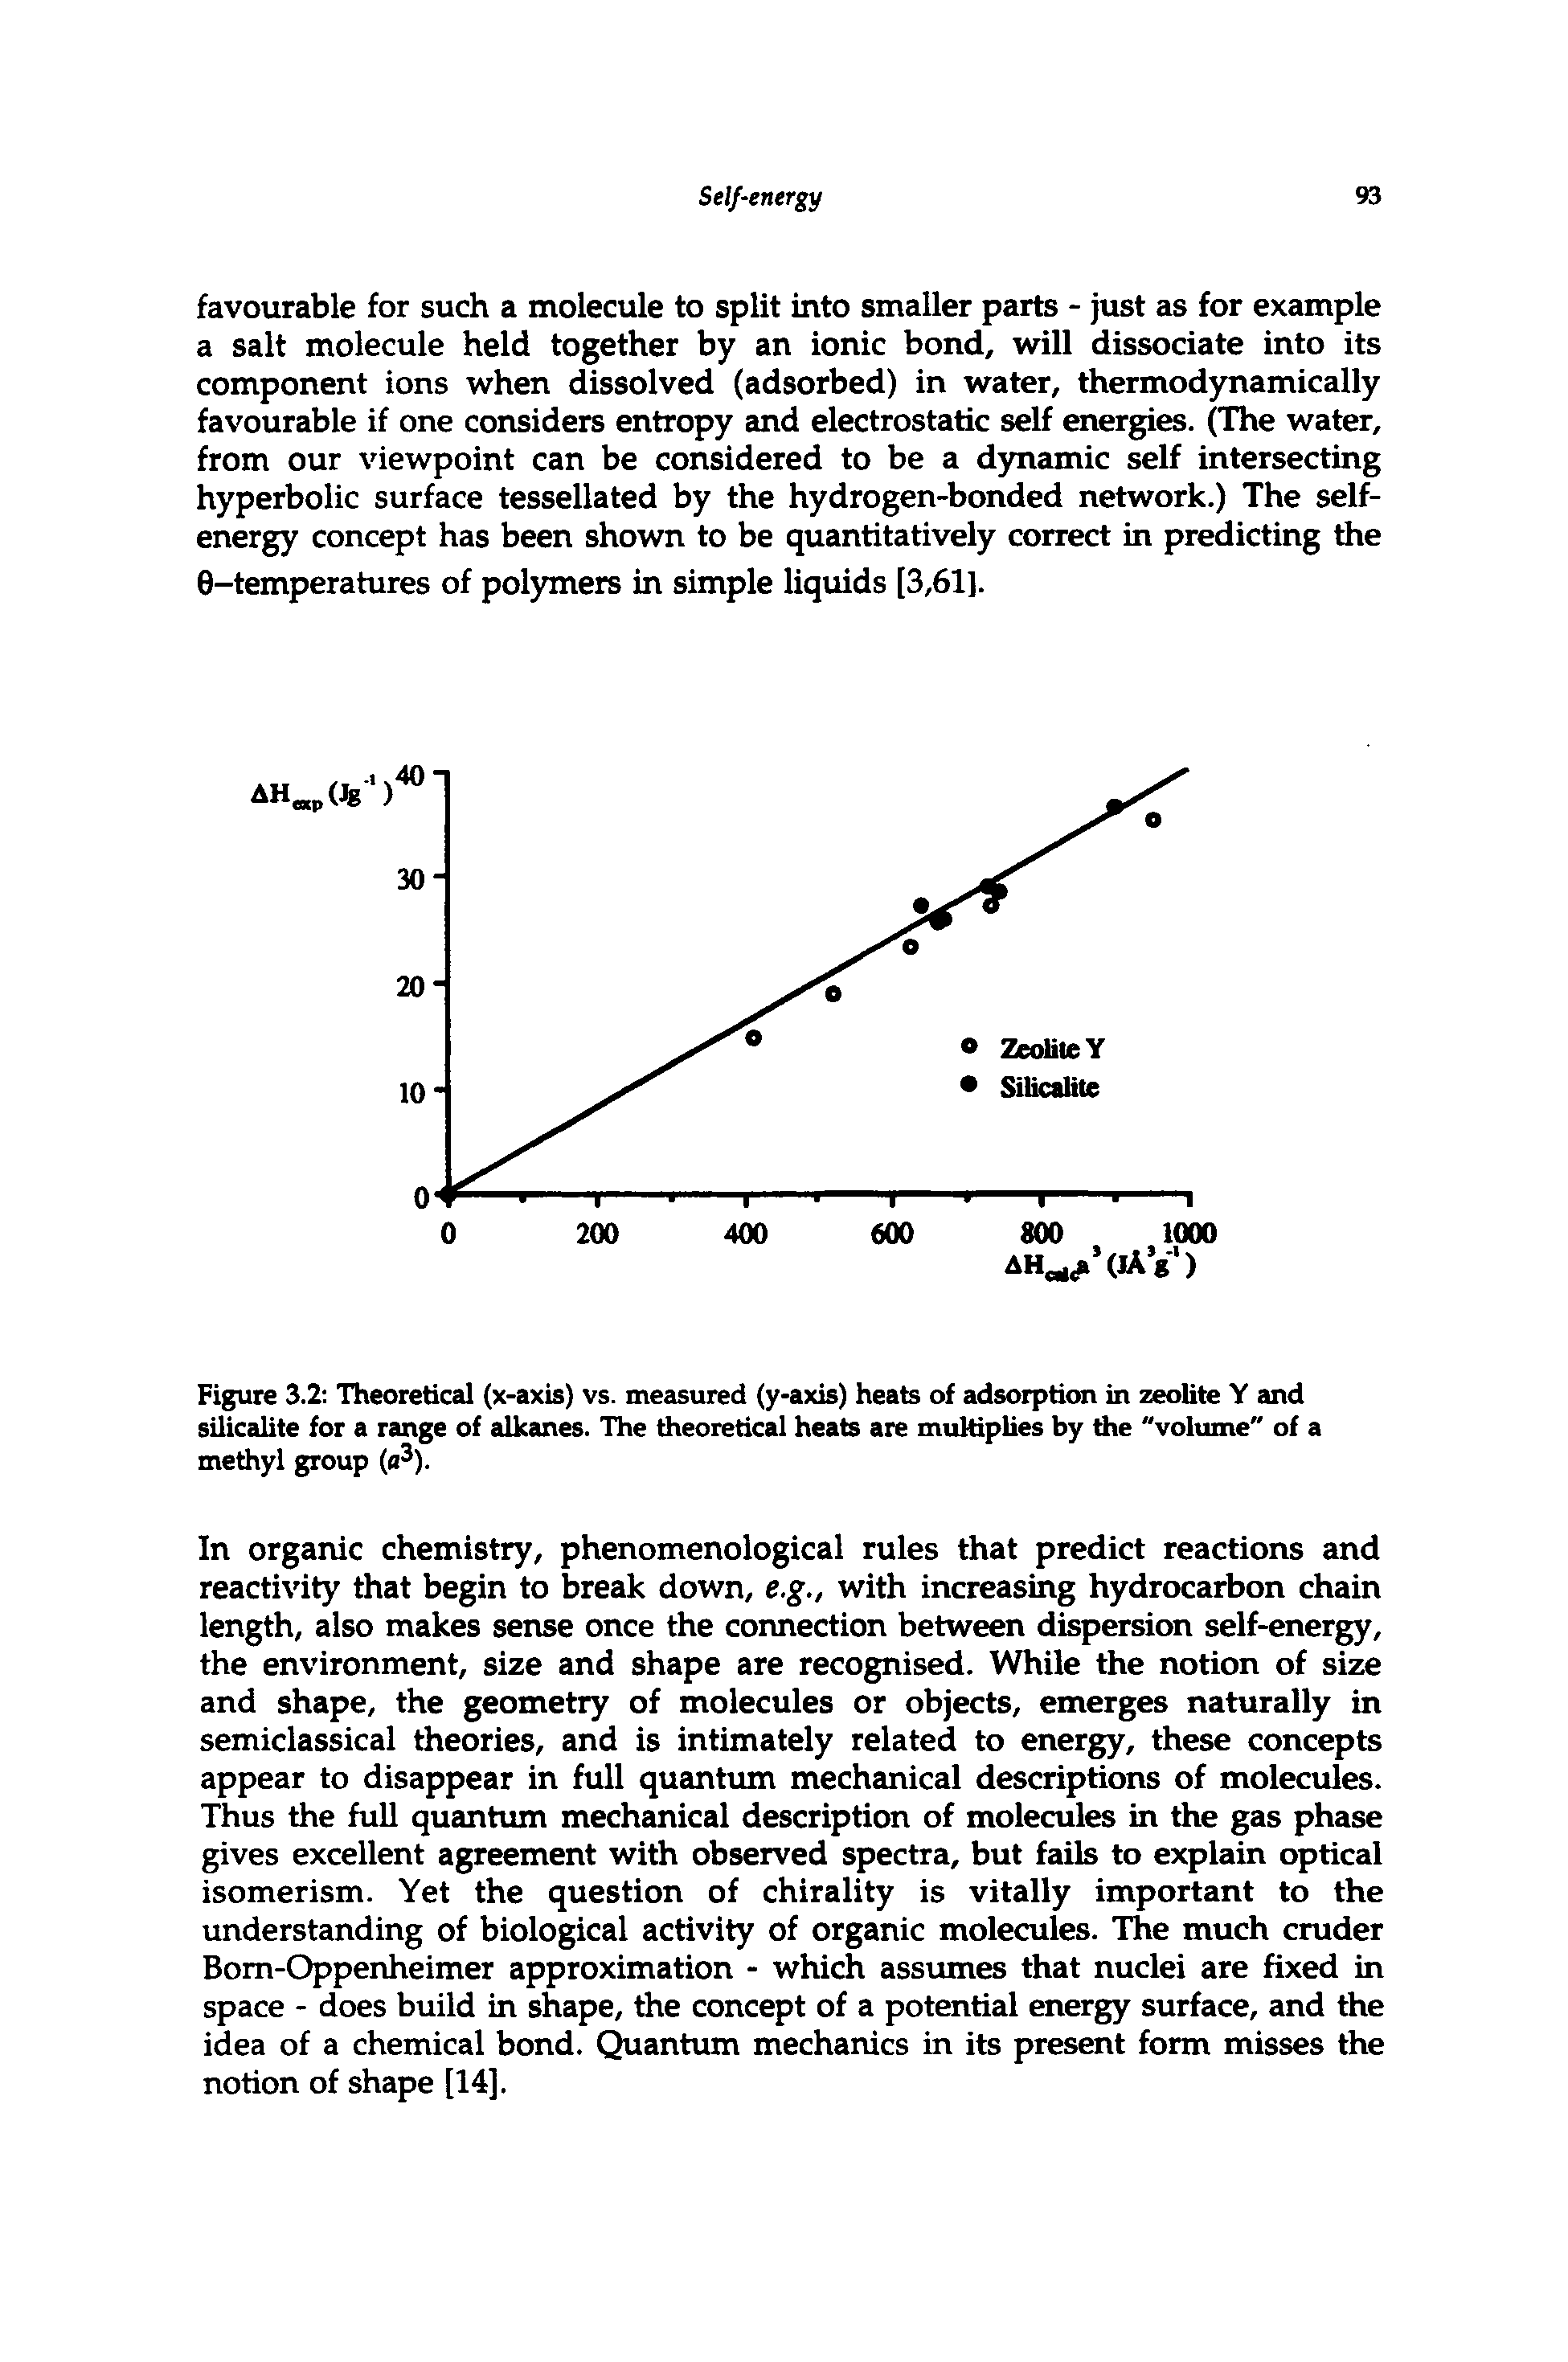 Figure 3.2 Theoretical (x-axis) vs. measured (y-axis) heats of adsorption in zeolite Y and silicalite for a range of alkanes. The theoretical heats are multiplies by the "volume" of a methyl group (a ).